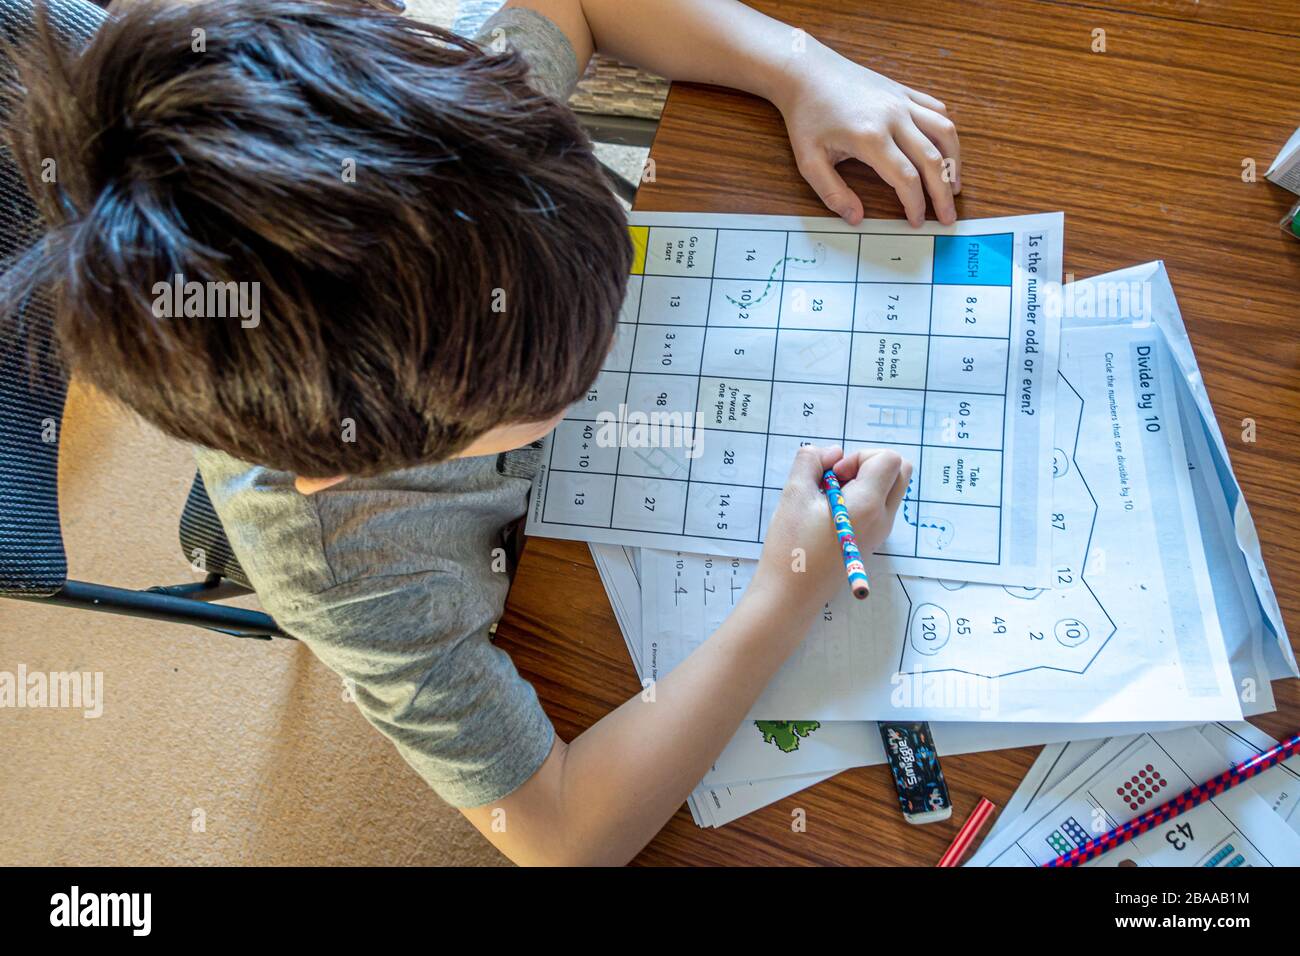 A young boy working on maths puzzles as part of a maths themed game. This is part of home learning as a result of the coronavirus pandemic. Stock Photo